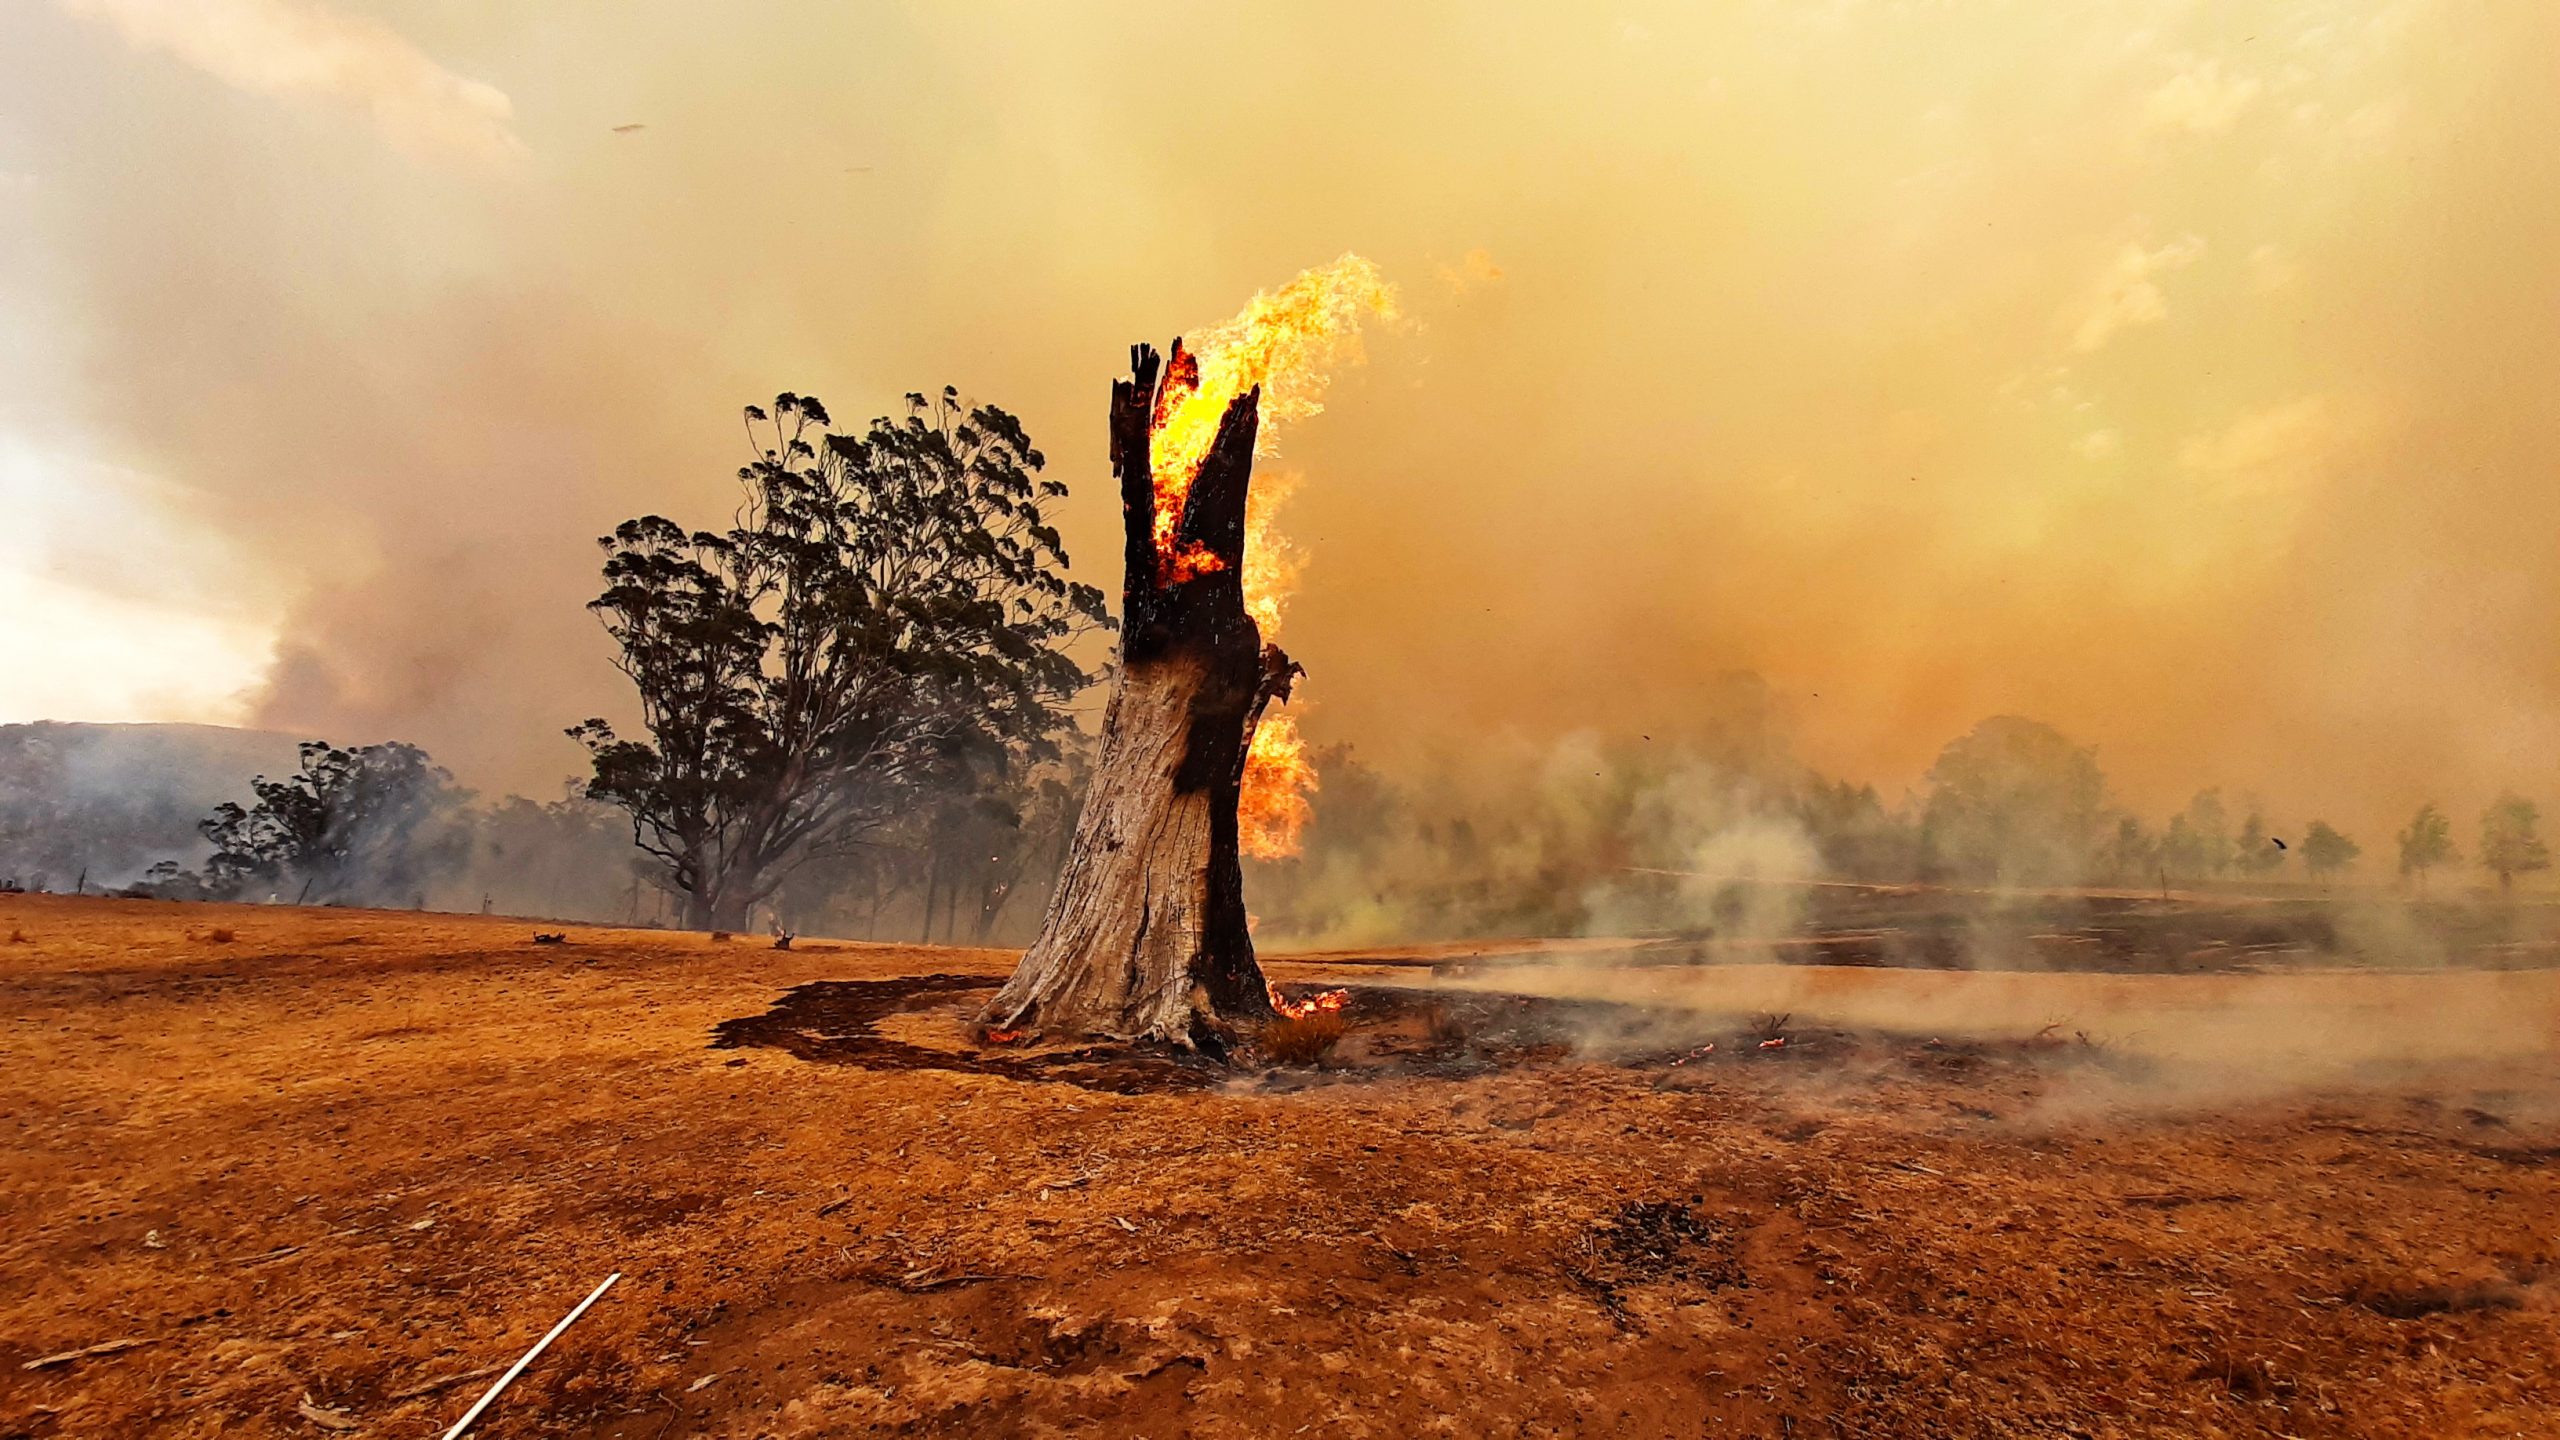 A burned tree trunk on fire in the middle of a burned landscape.